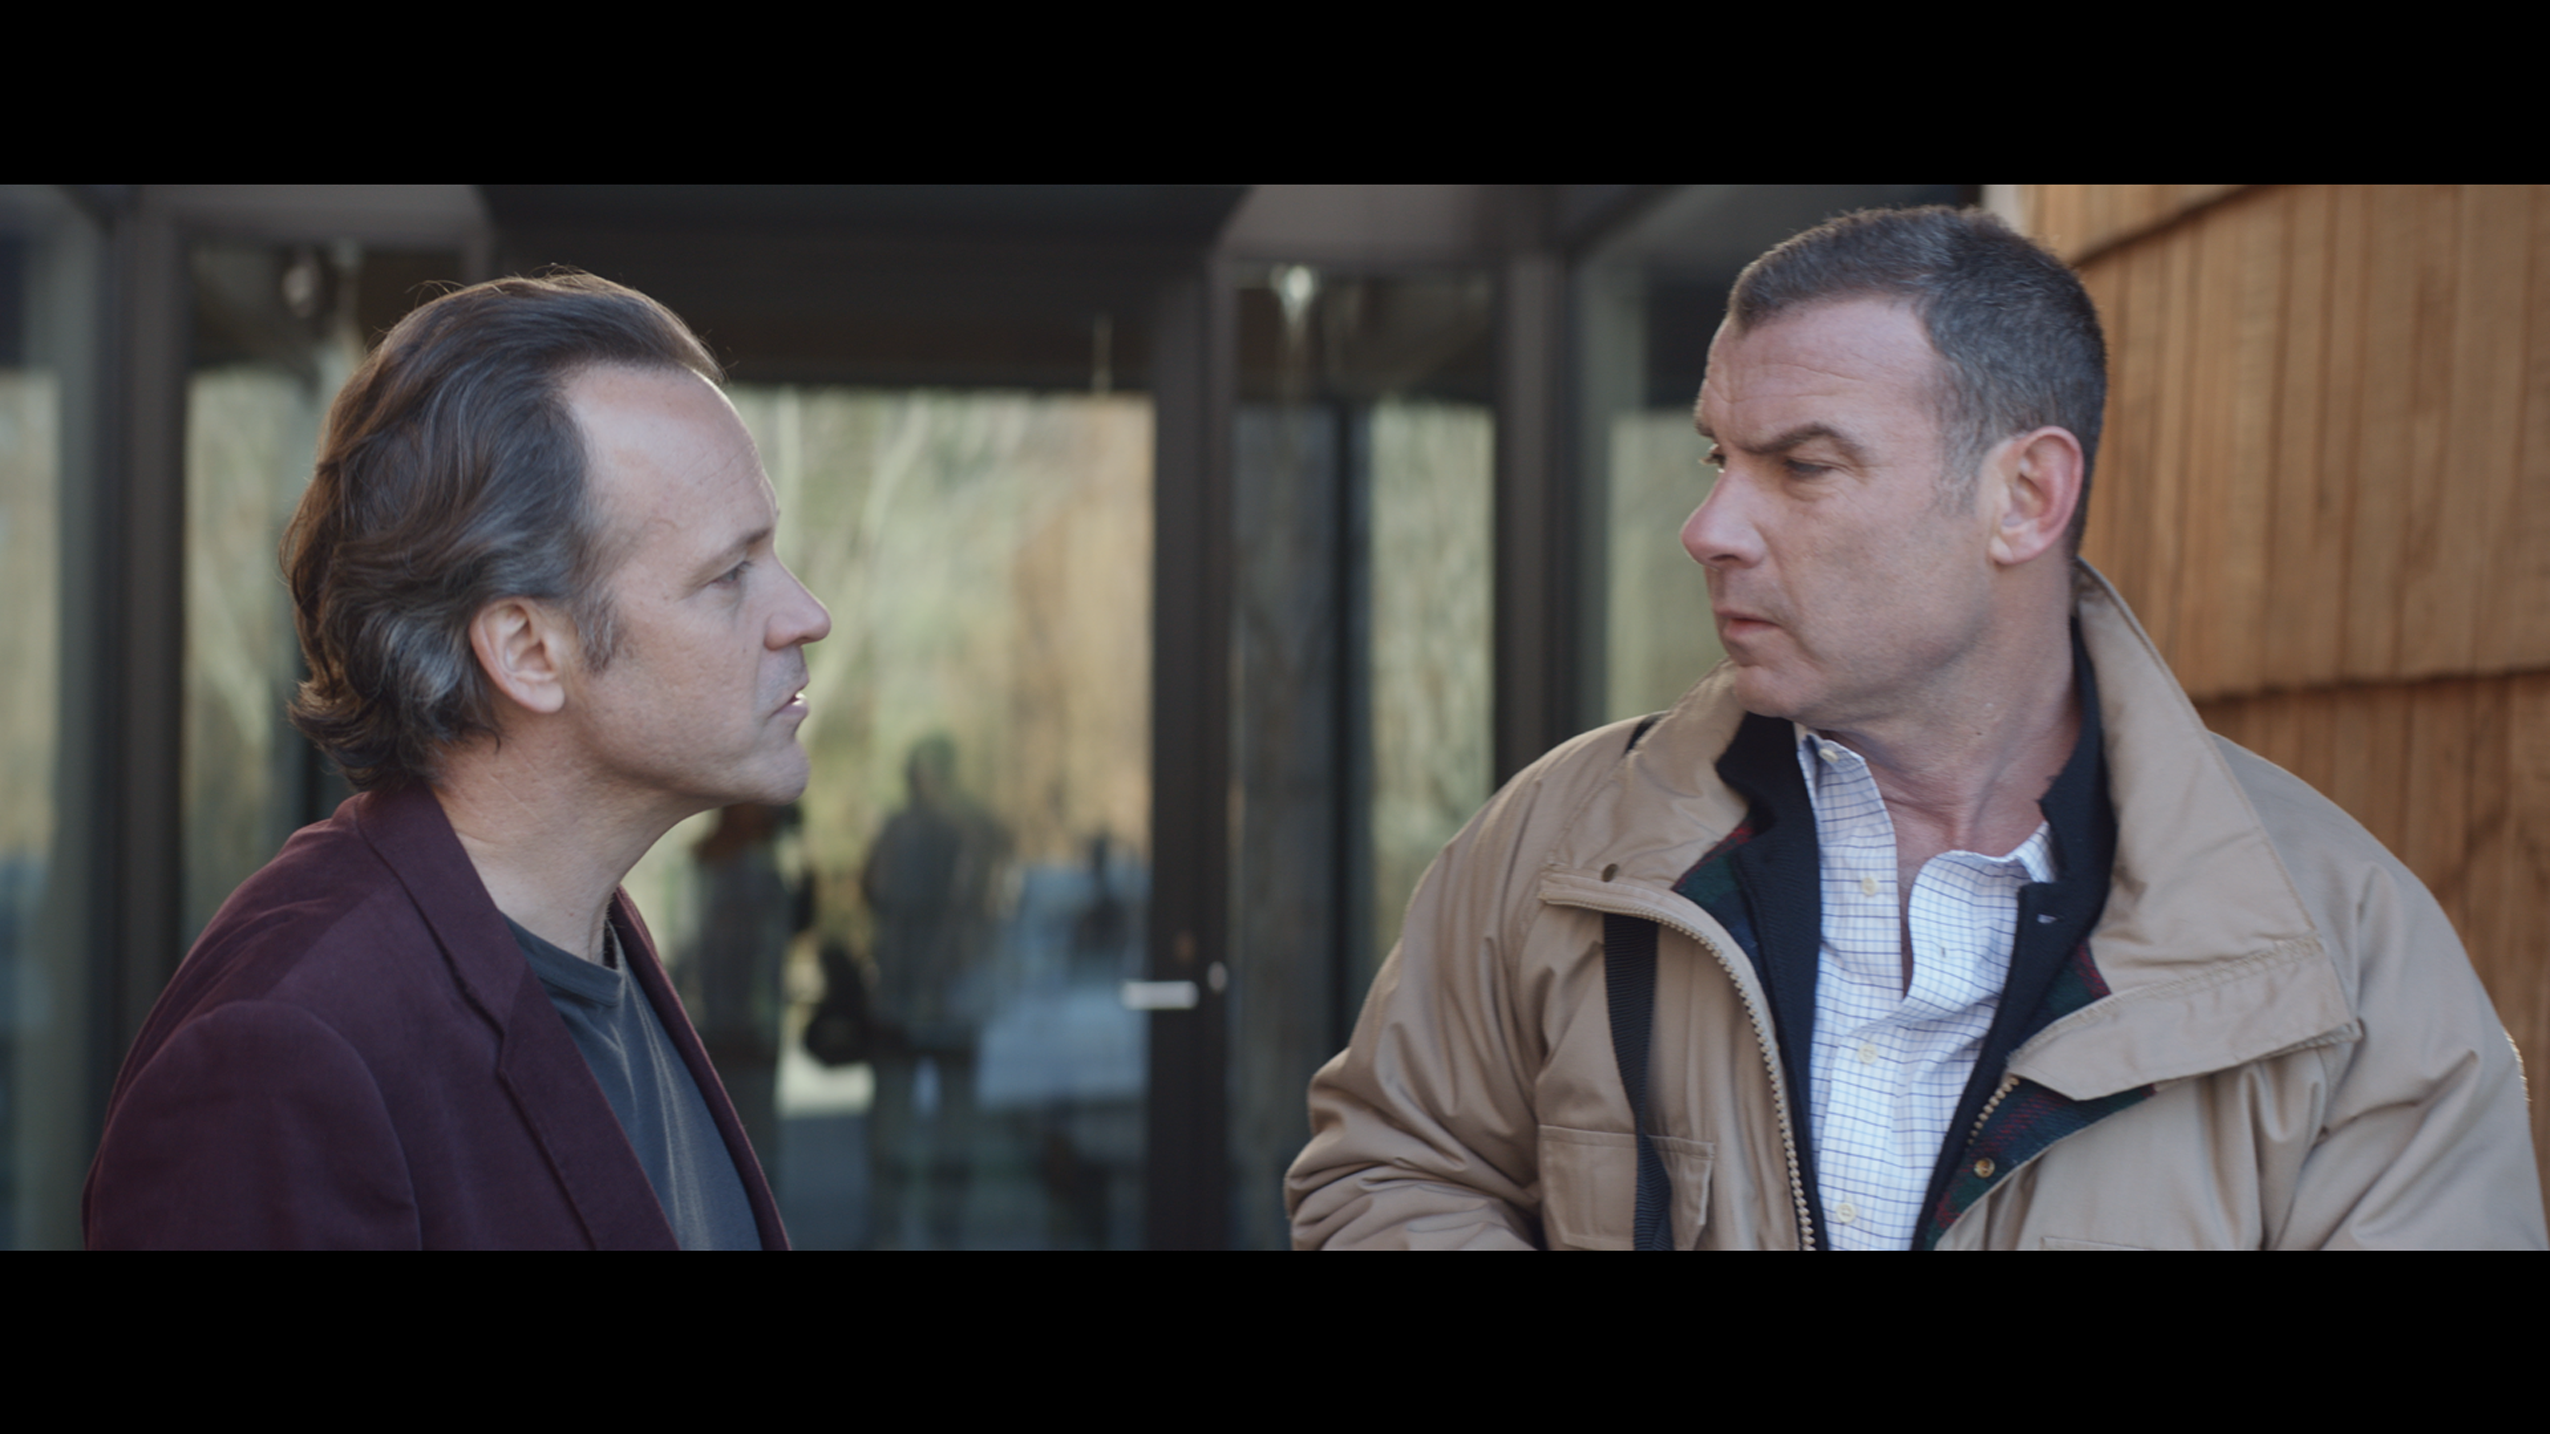 A still from the film, where two middle-aged white men face each other in front of a glass wall. One is frowning slightly and they look as if they are in the middle of a conversation.